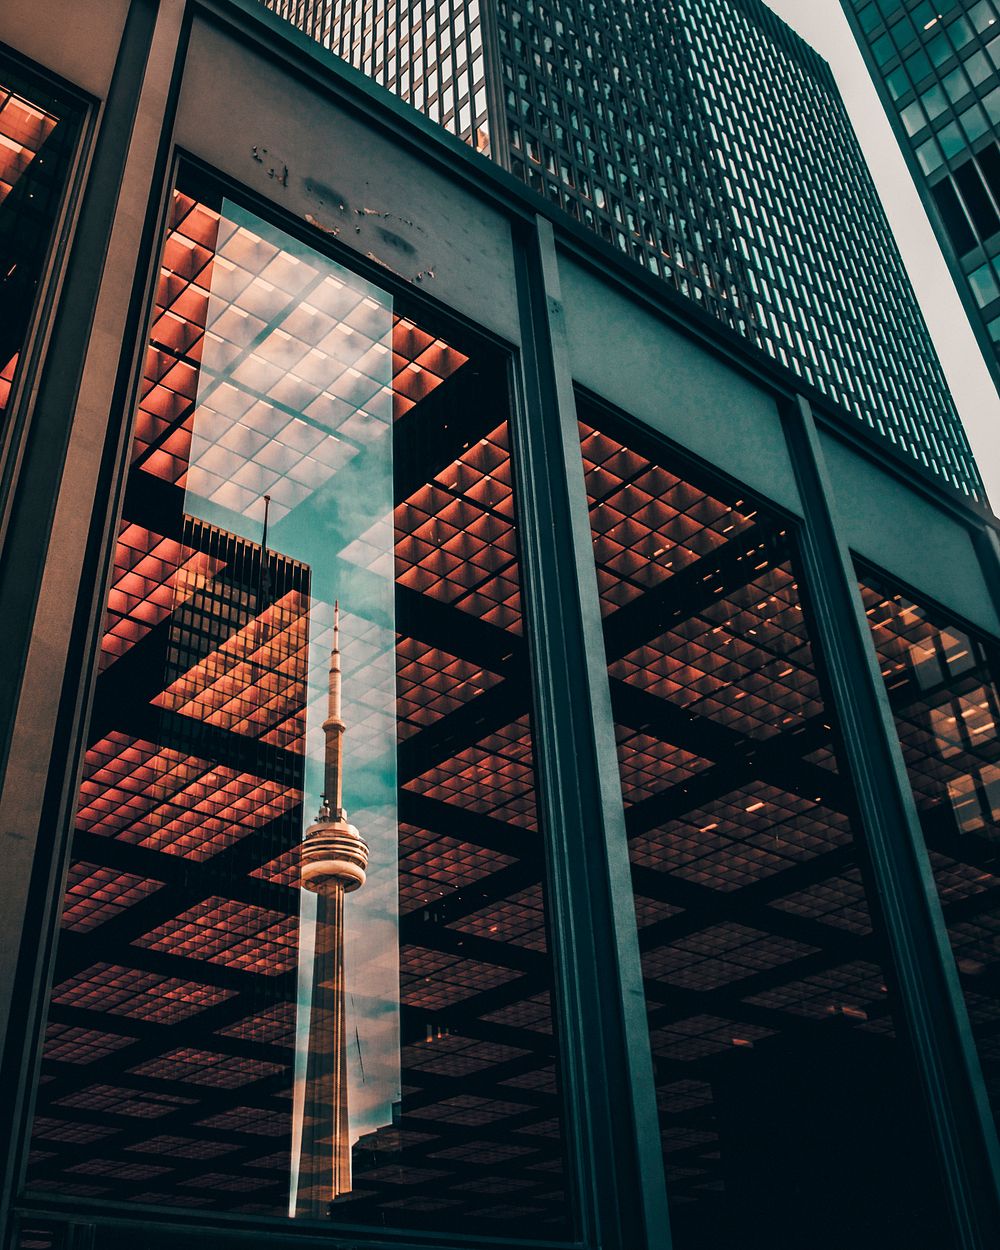 The CN Tower in Toronto reflected in the window of a nearby building. Original public domain image from Wikimedia Commons